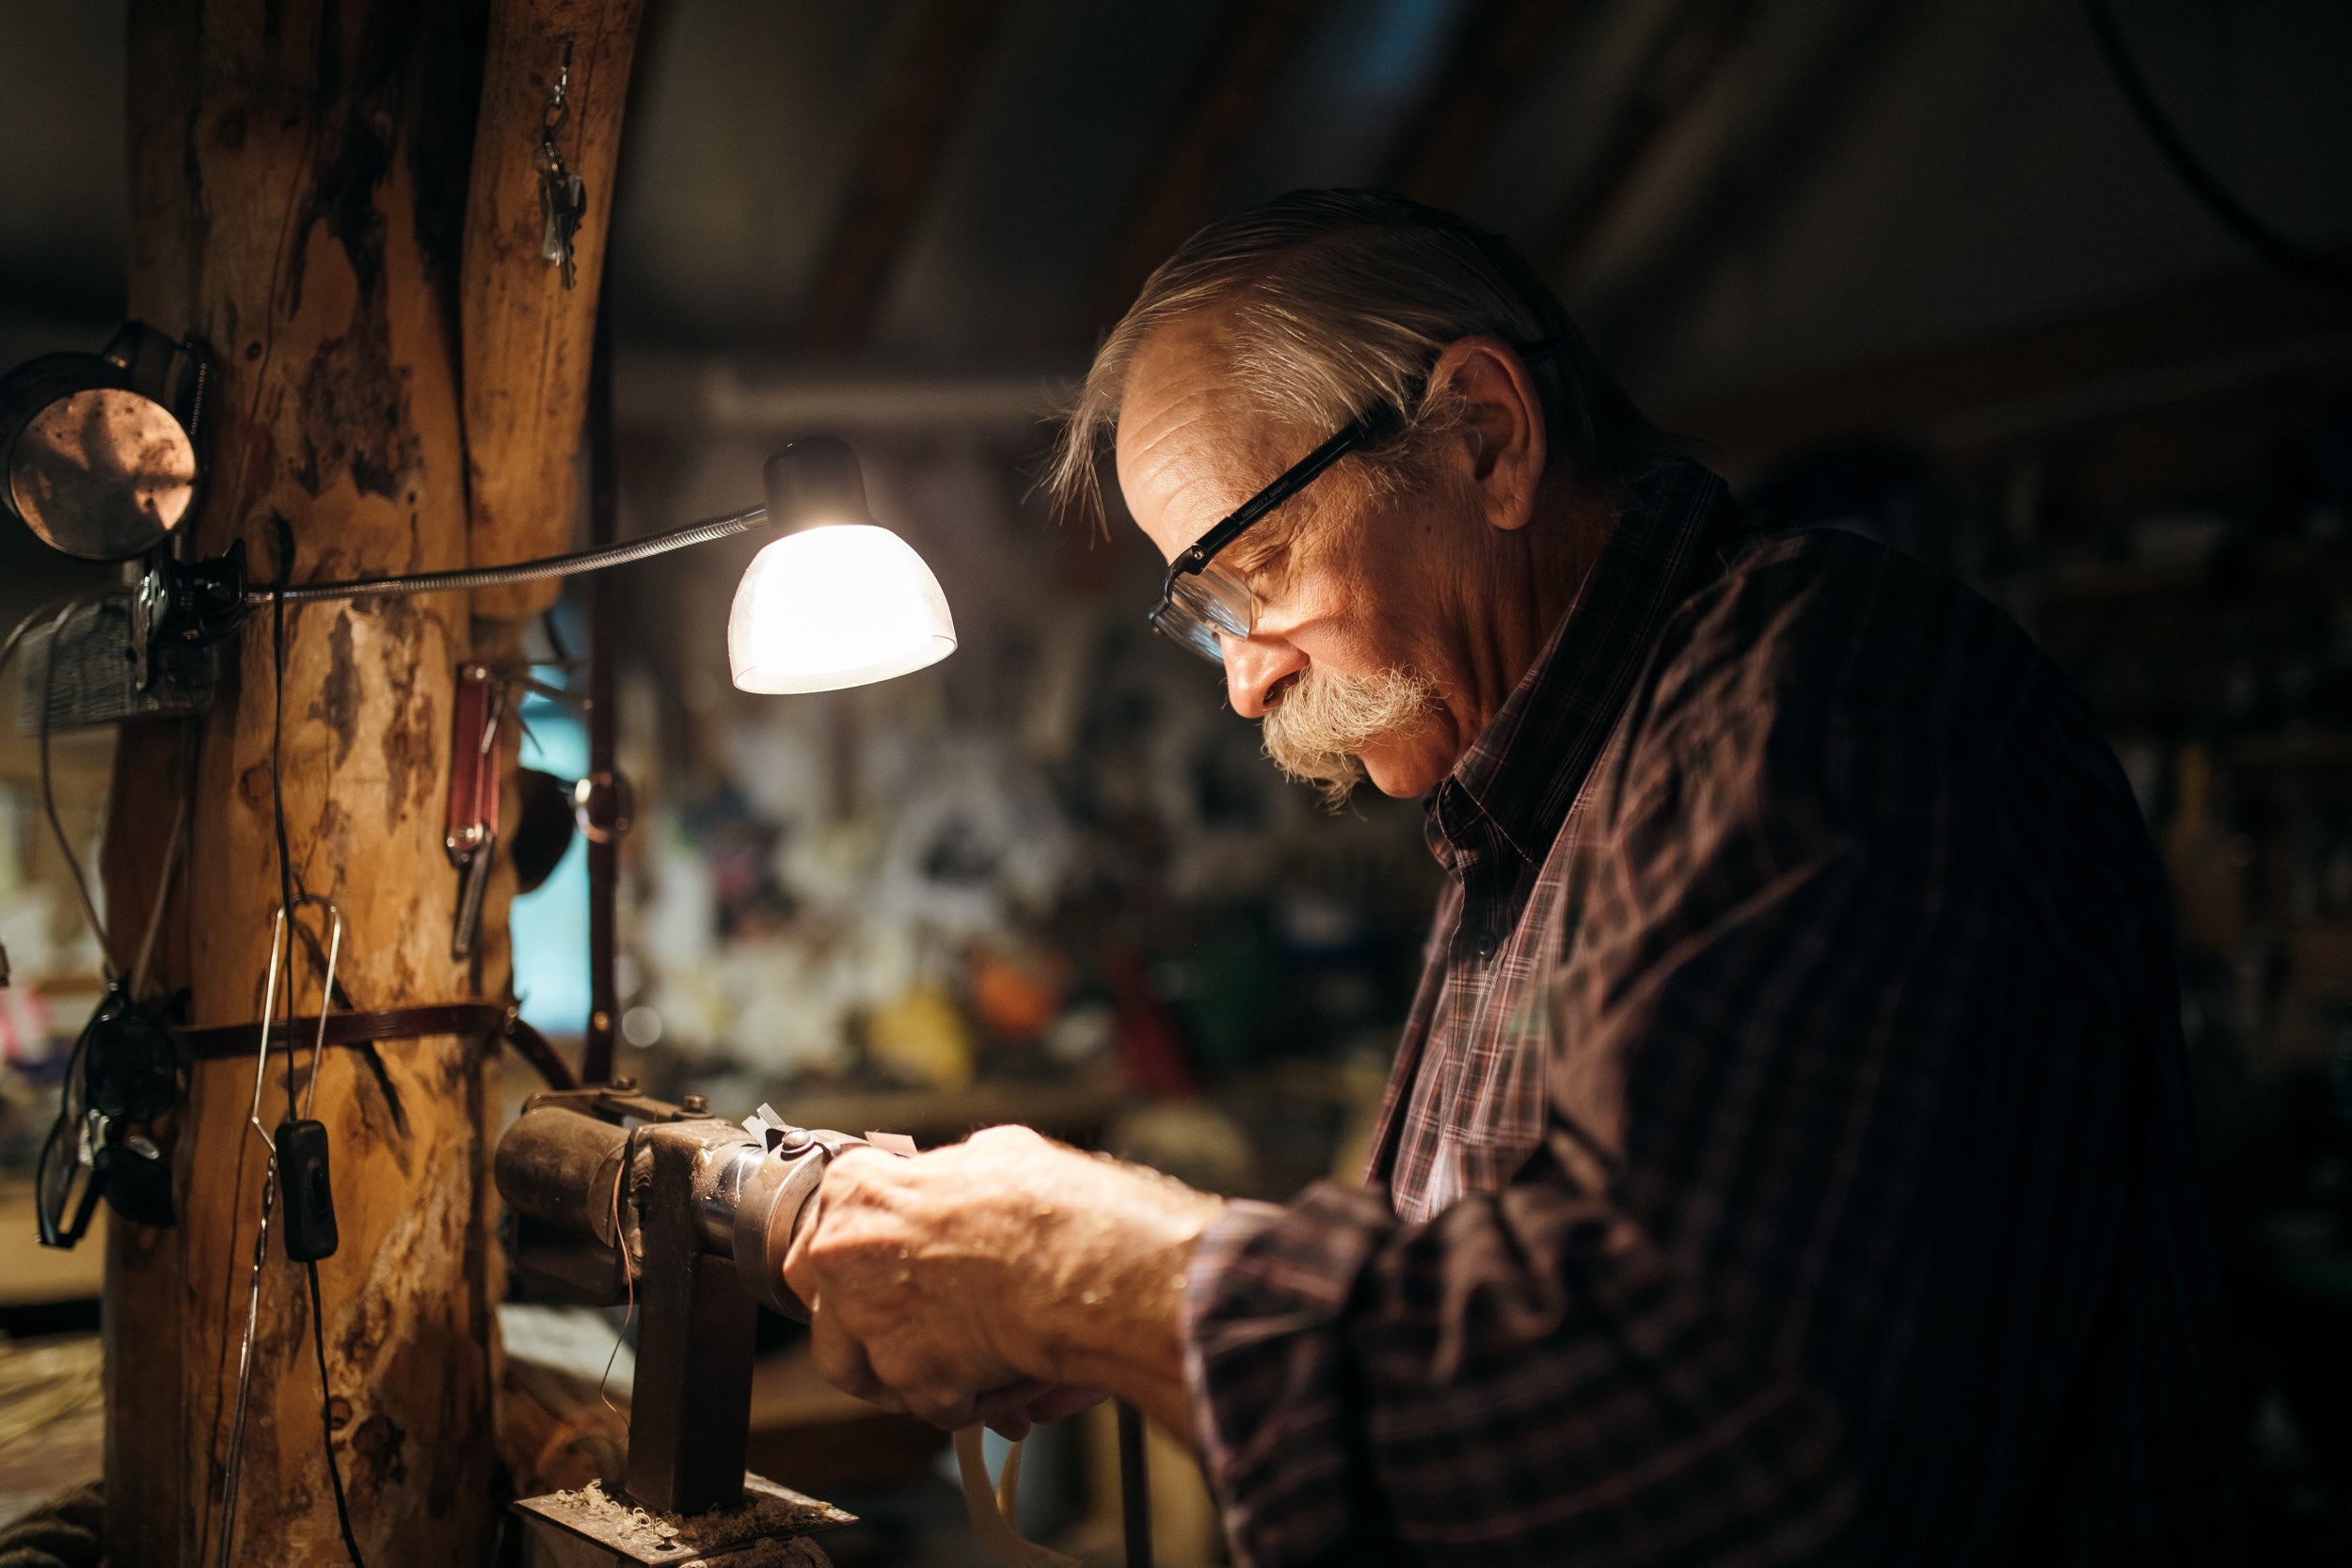 An older person works in a cozy workshop lit by a work light